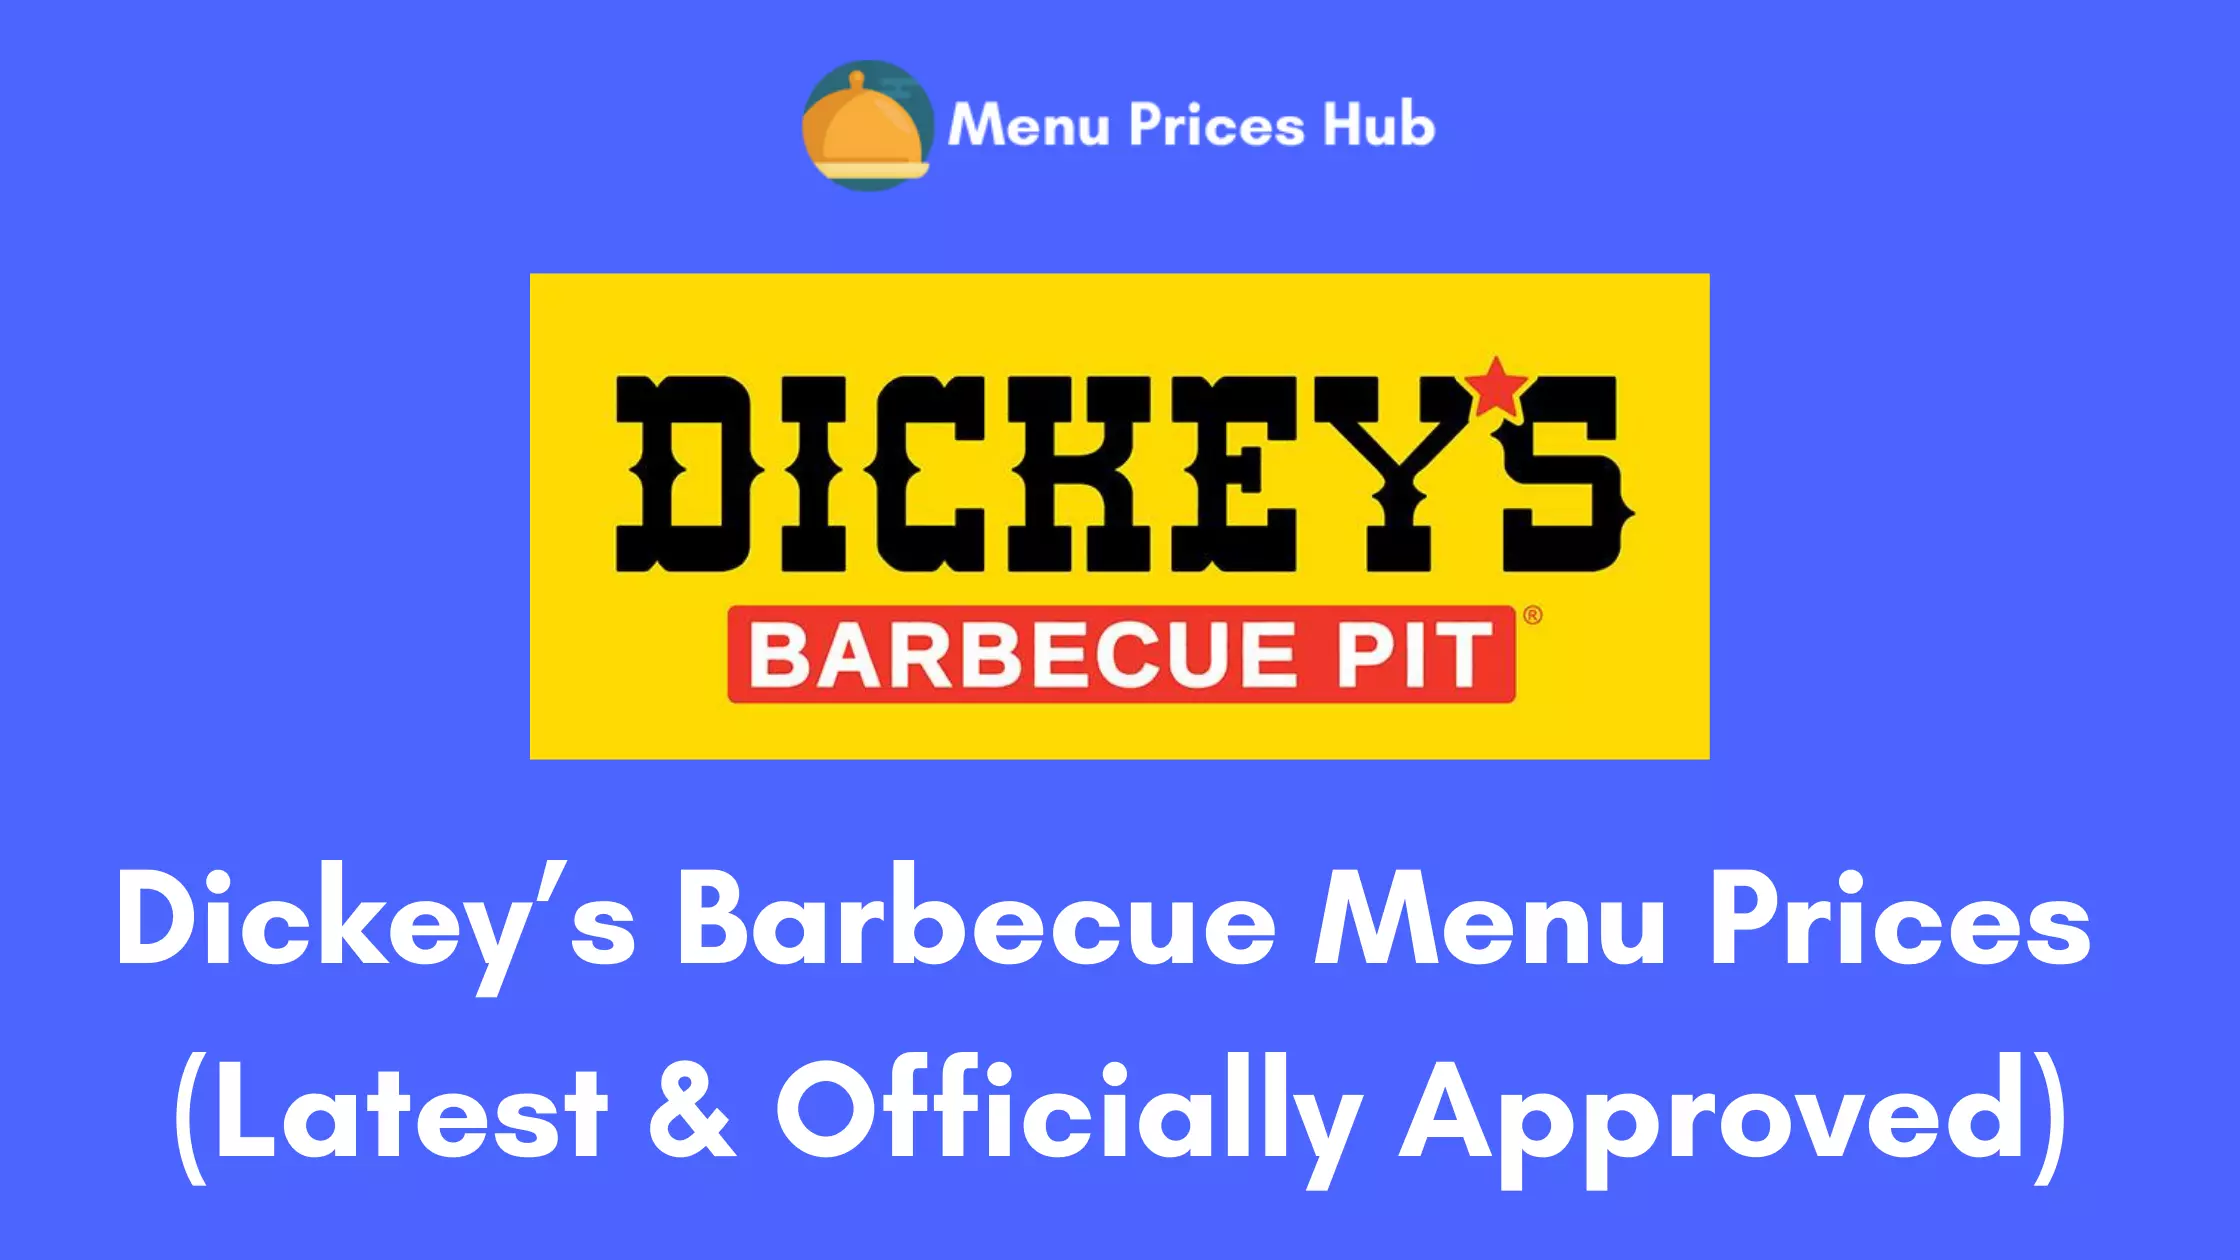 Dickey’s Barbecue Menu Prices